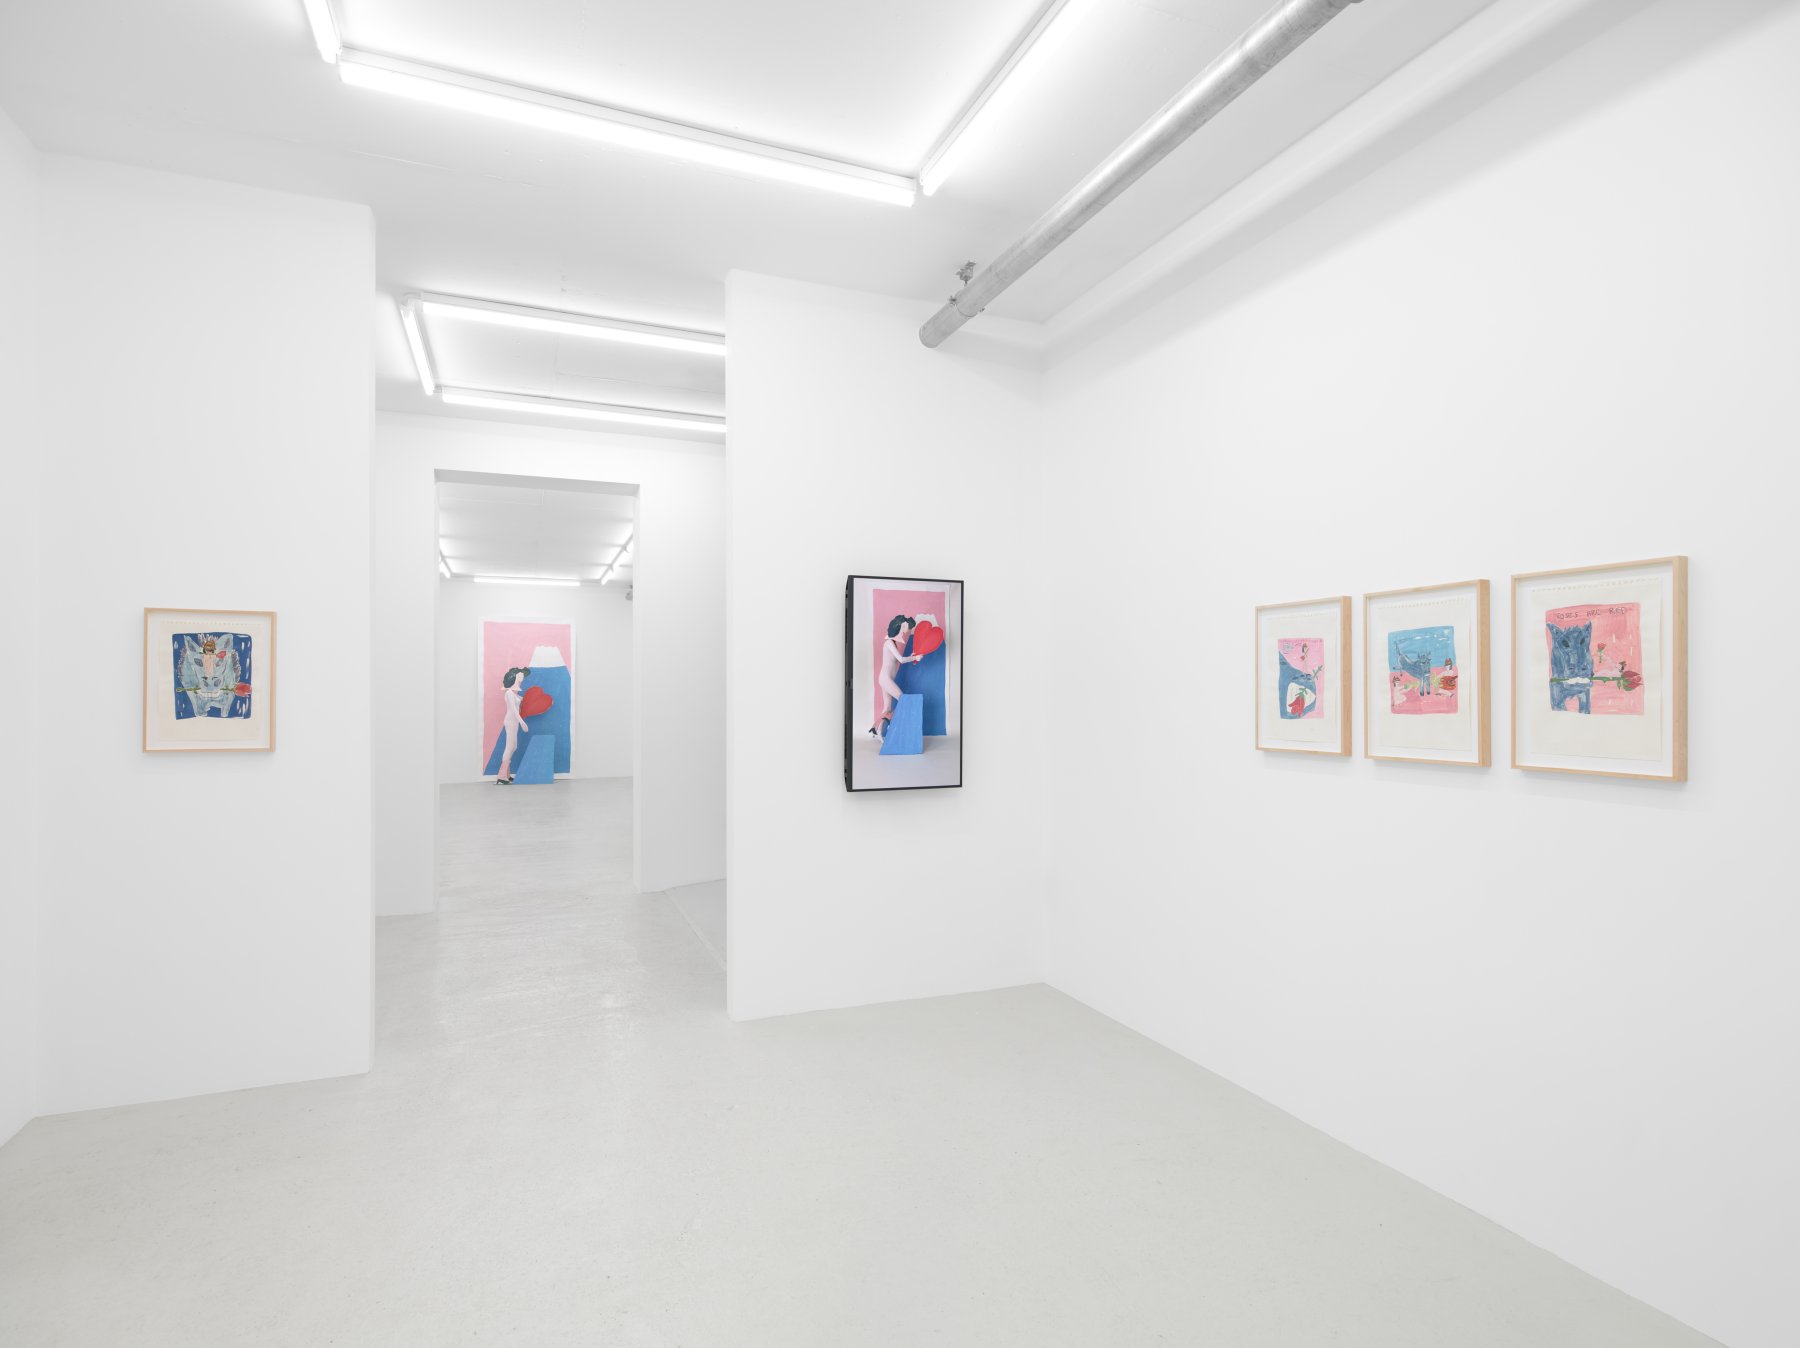 Installation image for Kate Groobey: Always Love, at Sim Smith